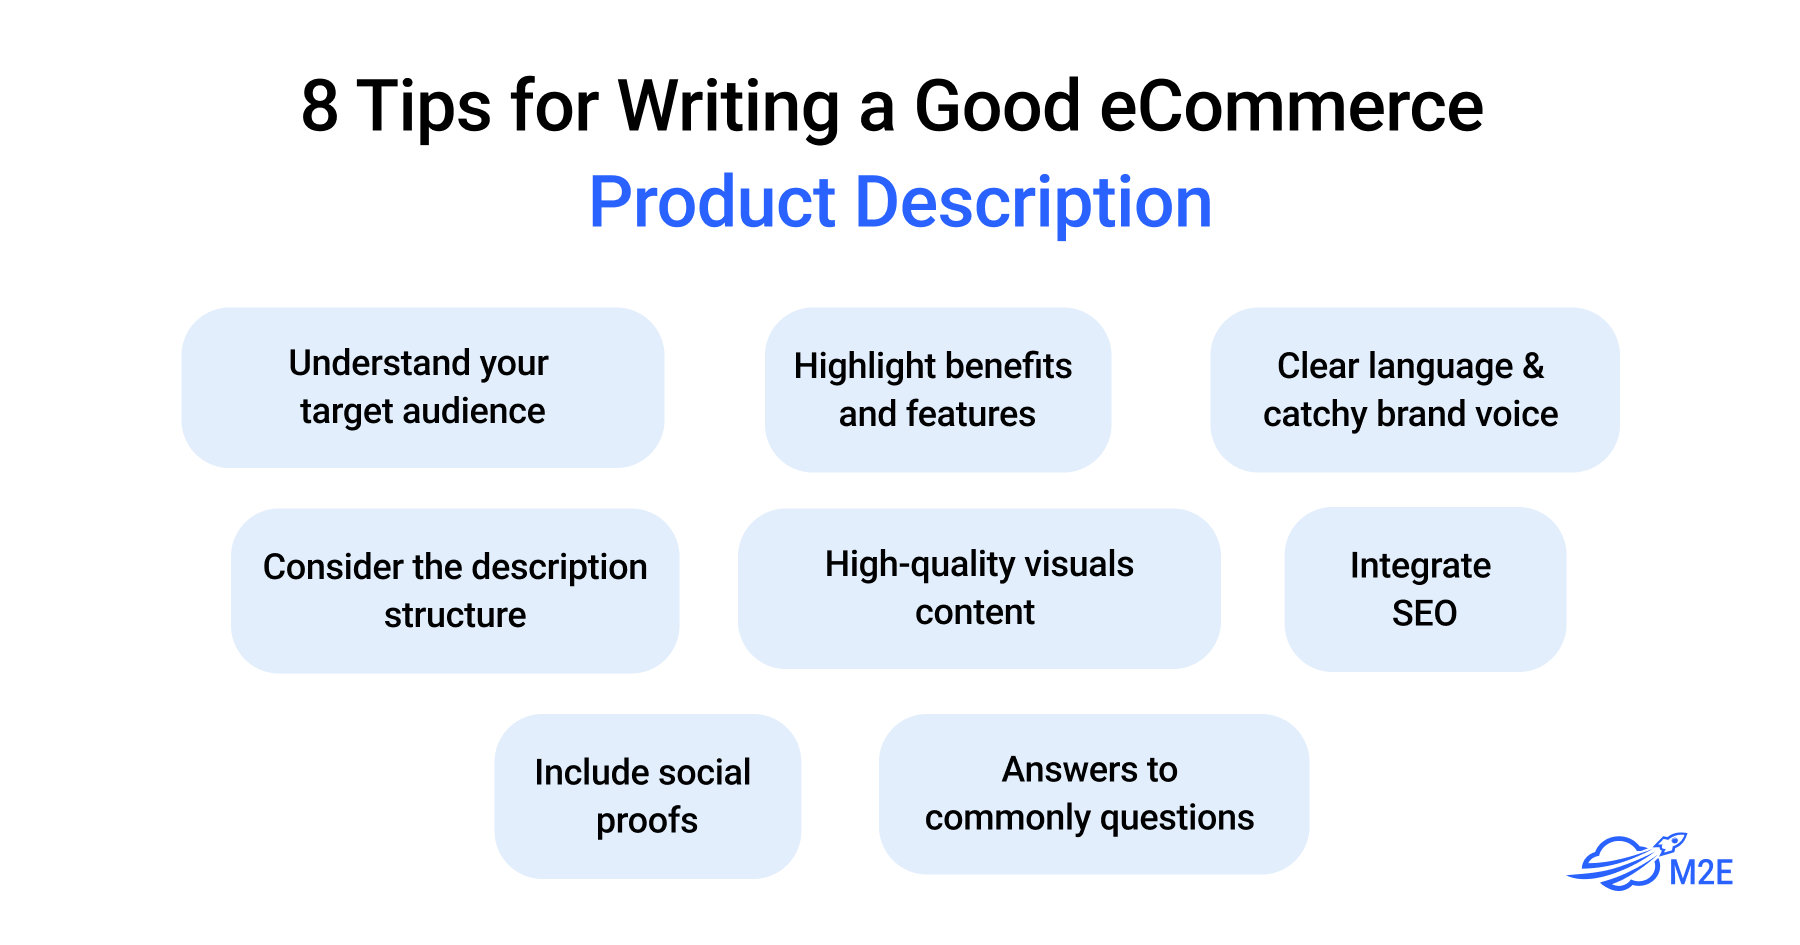 8 Tips for Writing a Good eCommerce Product Description